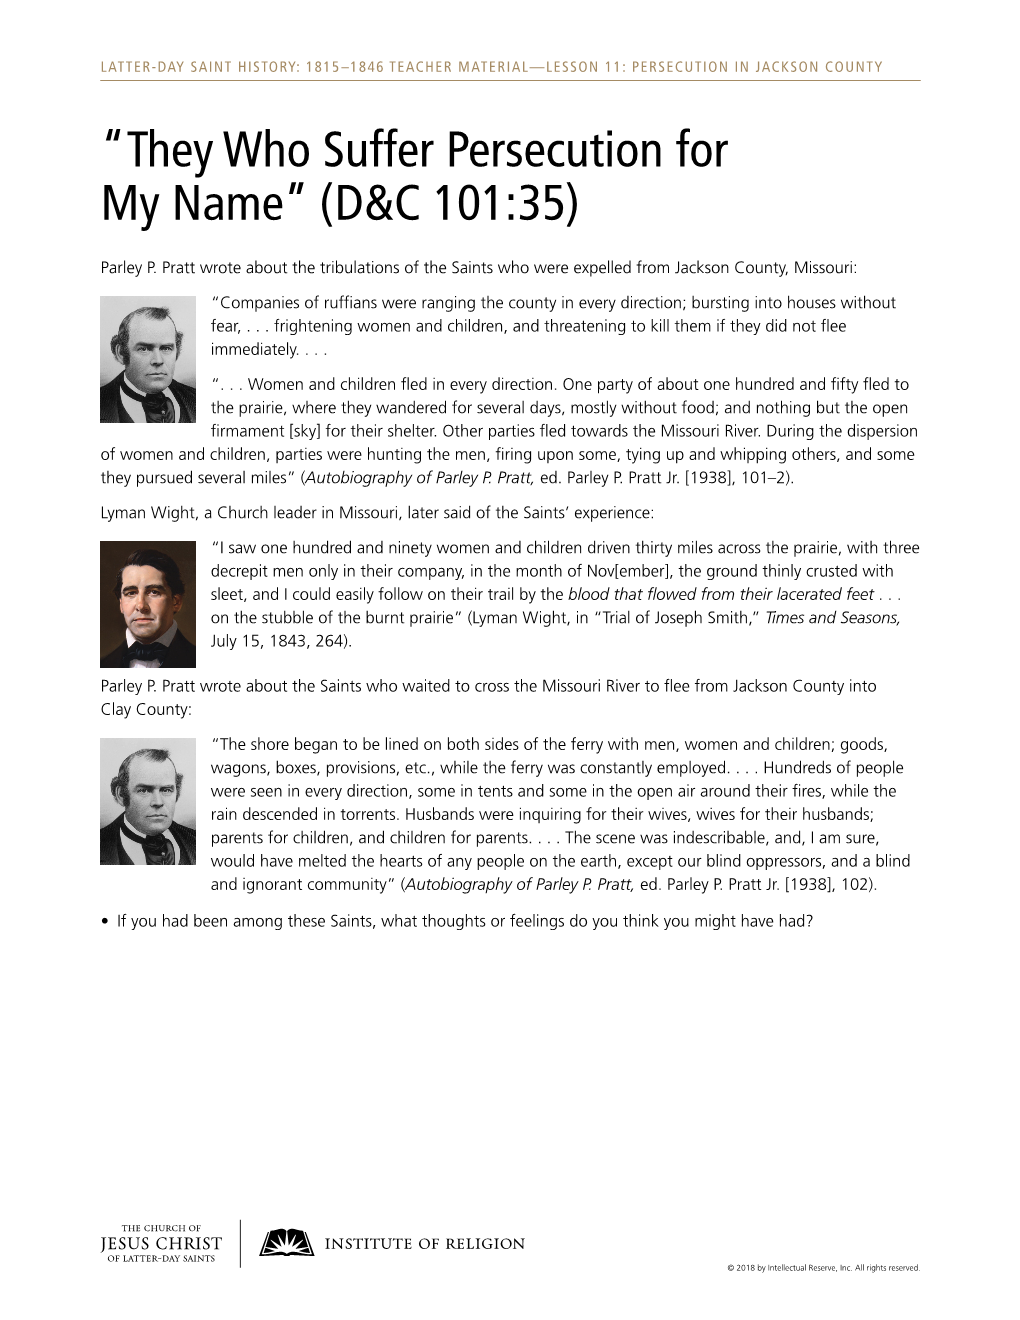 “They Who Suffer Persecution for My Name” (D&C 101:35)